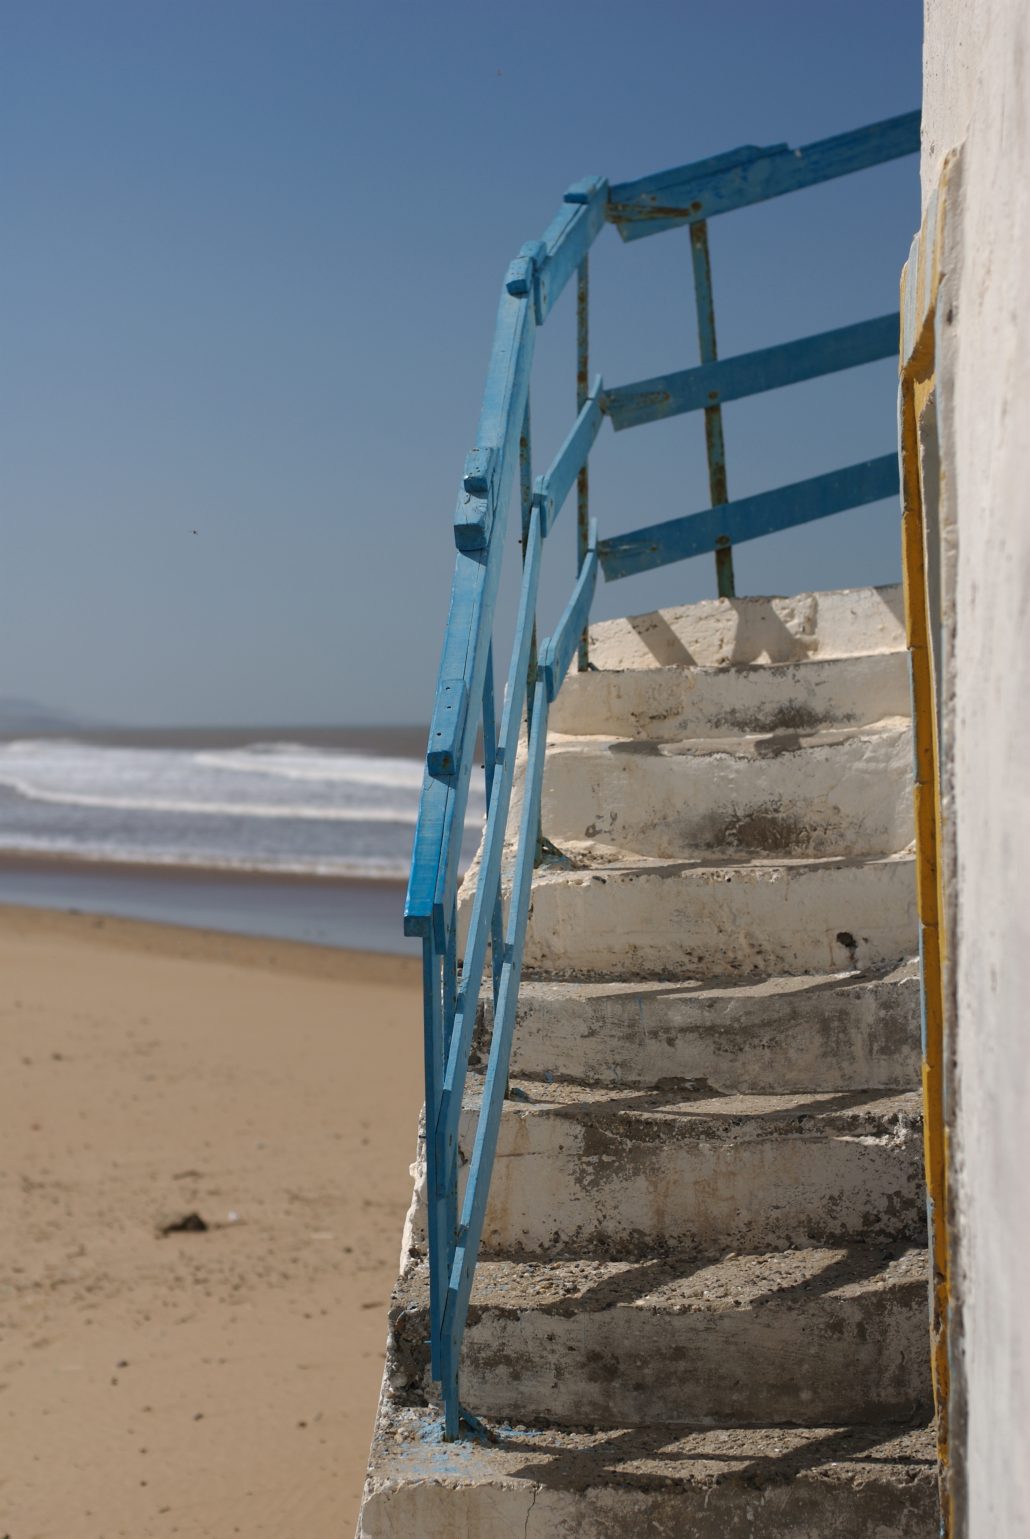 Stairs on sand